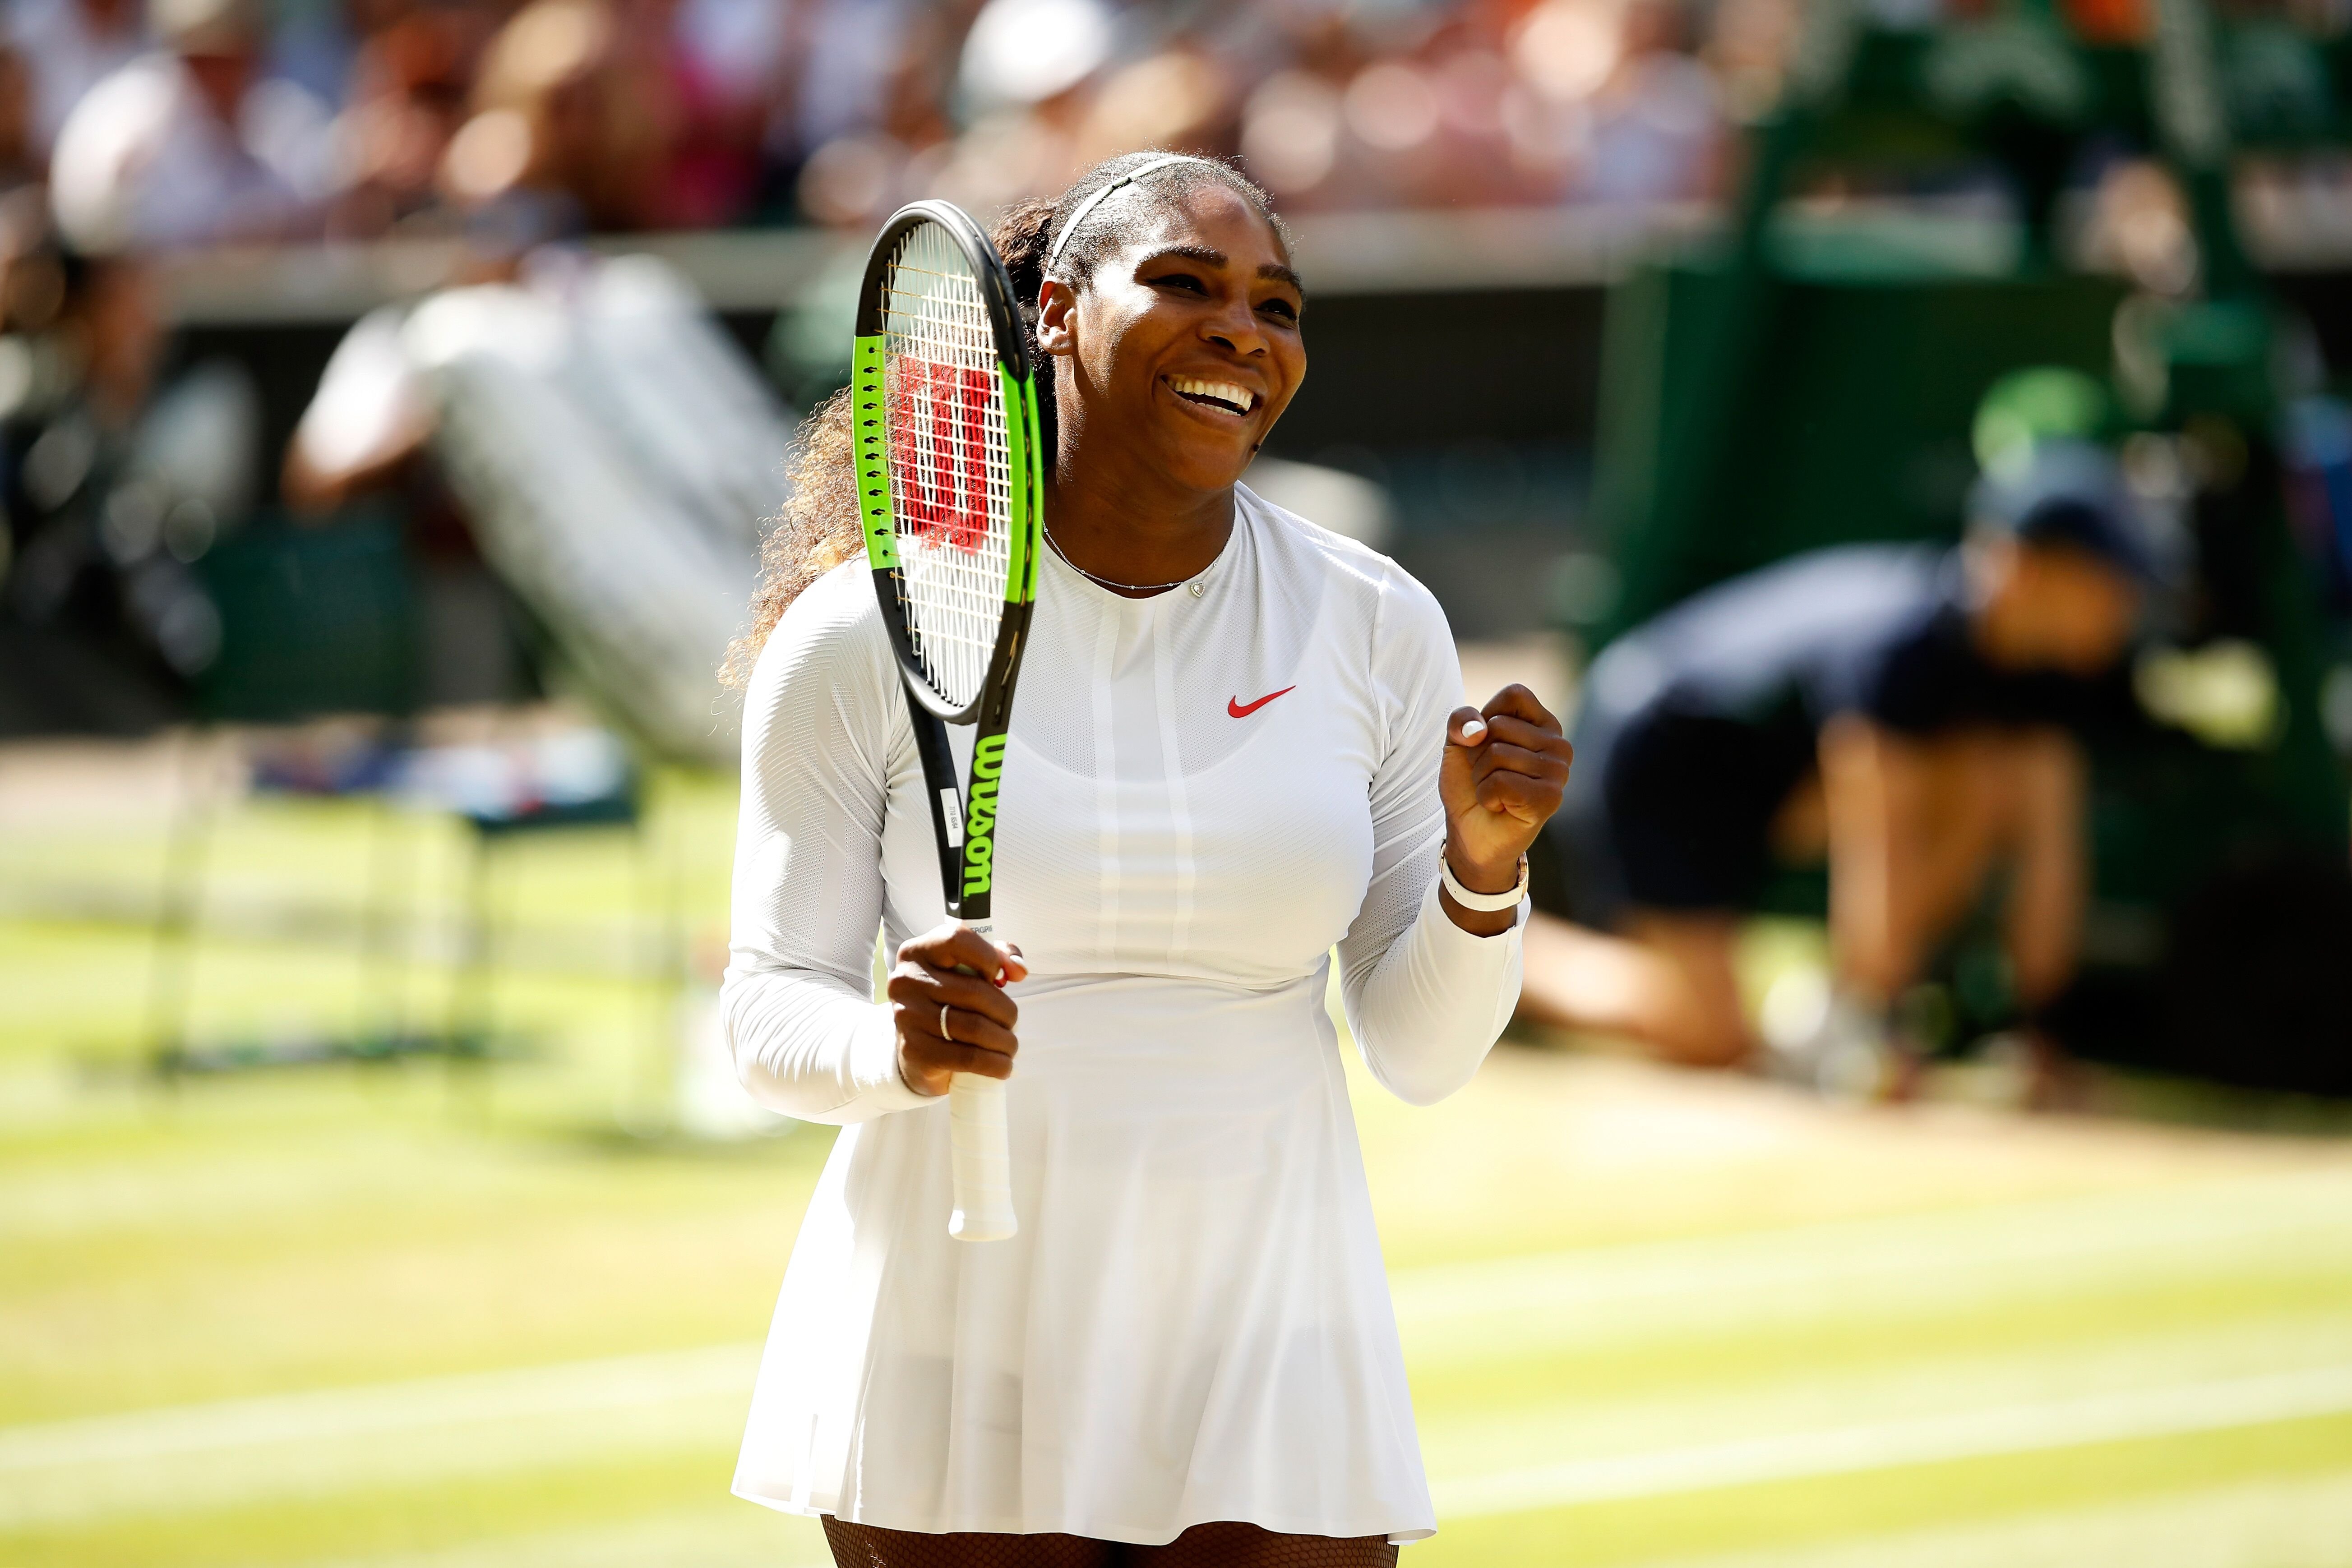 Serena Williams celebrates winning her Ladies' Singles Quarter-Finals match on day eight of the Wimbledon Lawn Tennis Championships at All England Lawn Tennis and Croquet Club on July 10, 2018 in London, England. | Source: Getty Images